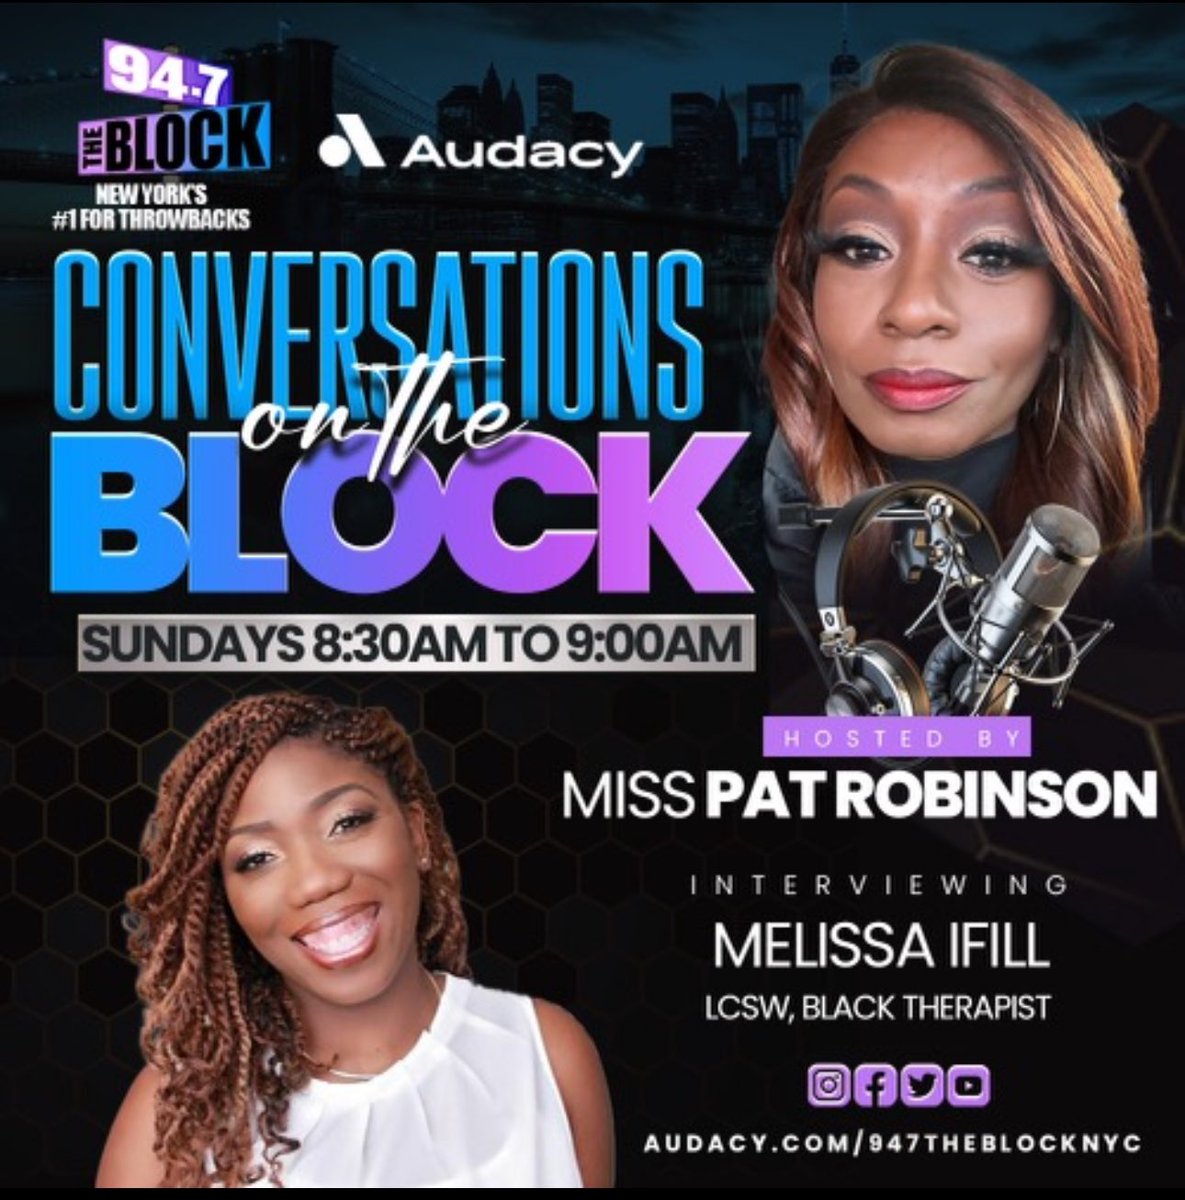 Sunday at 8:30am. @melissaifilllcsw -Melissa Ifill -Licensed Clinical Social Worker joins me on @convos_ontheblock @947theblock and we are discussing the impact of “Weathering-The health effects of stress and discrimination “. She’s a dynamic therapist. Don’t miss this!